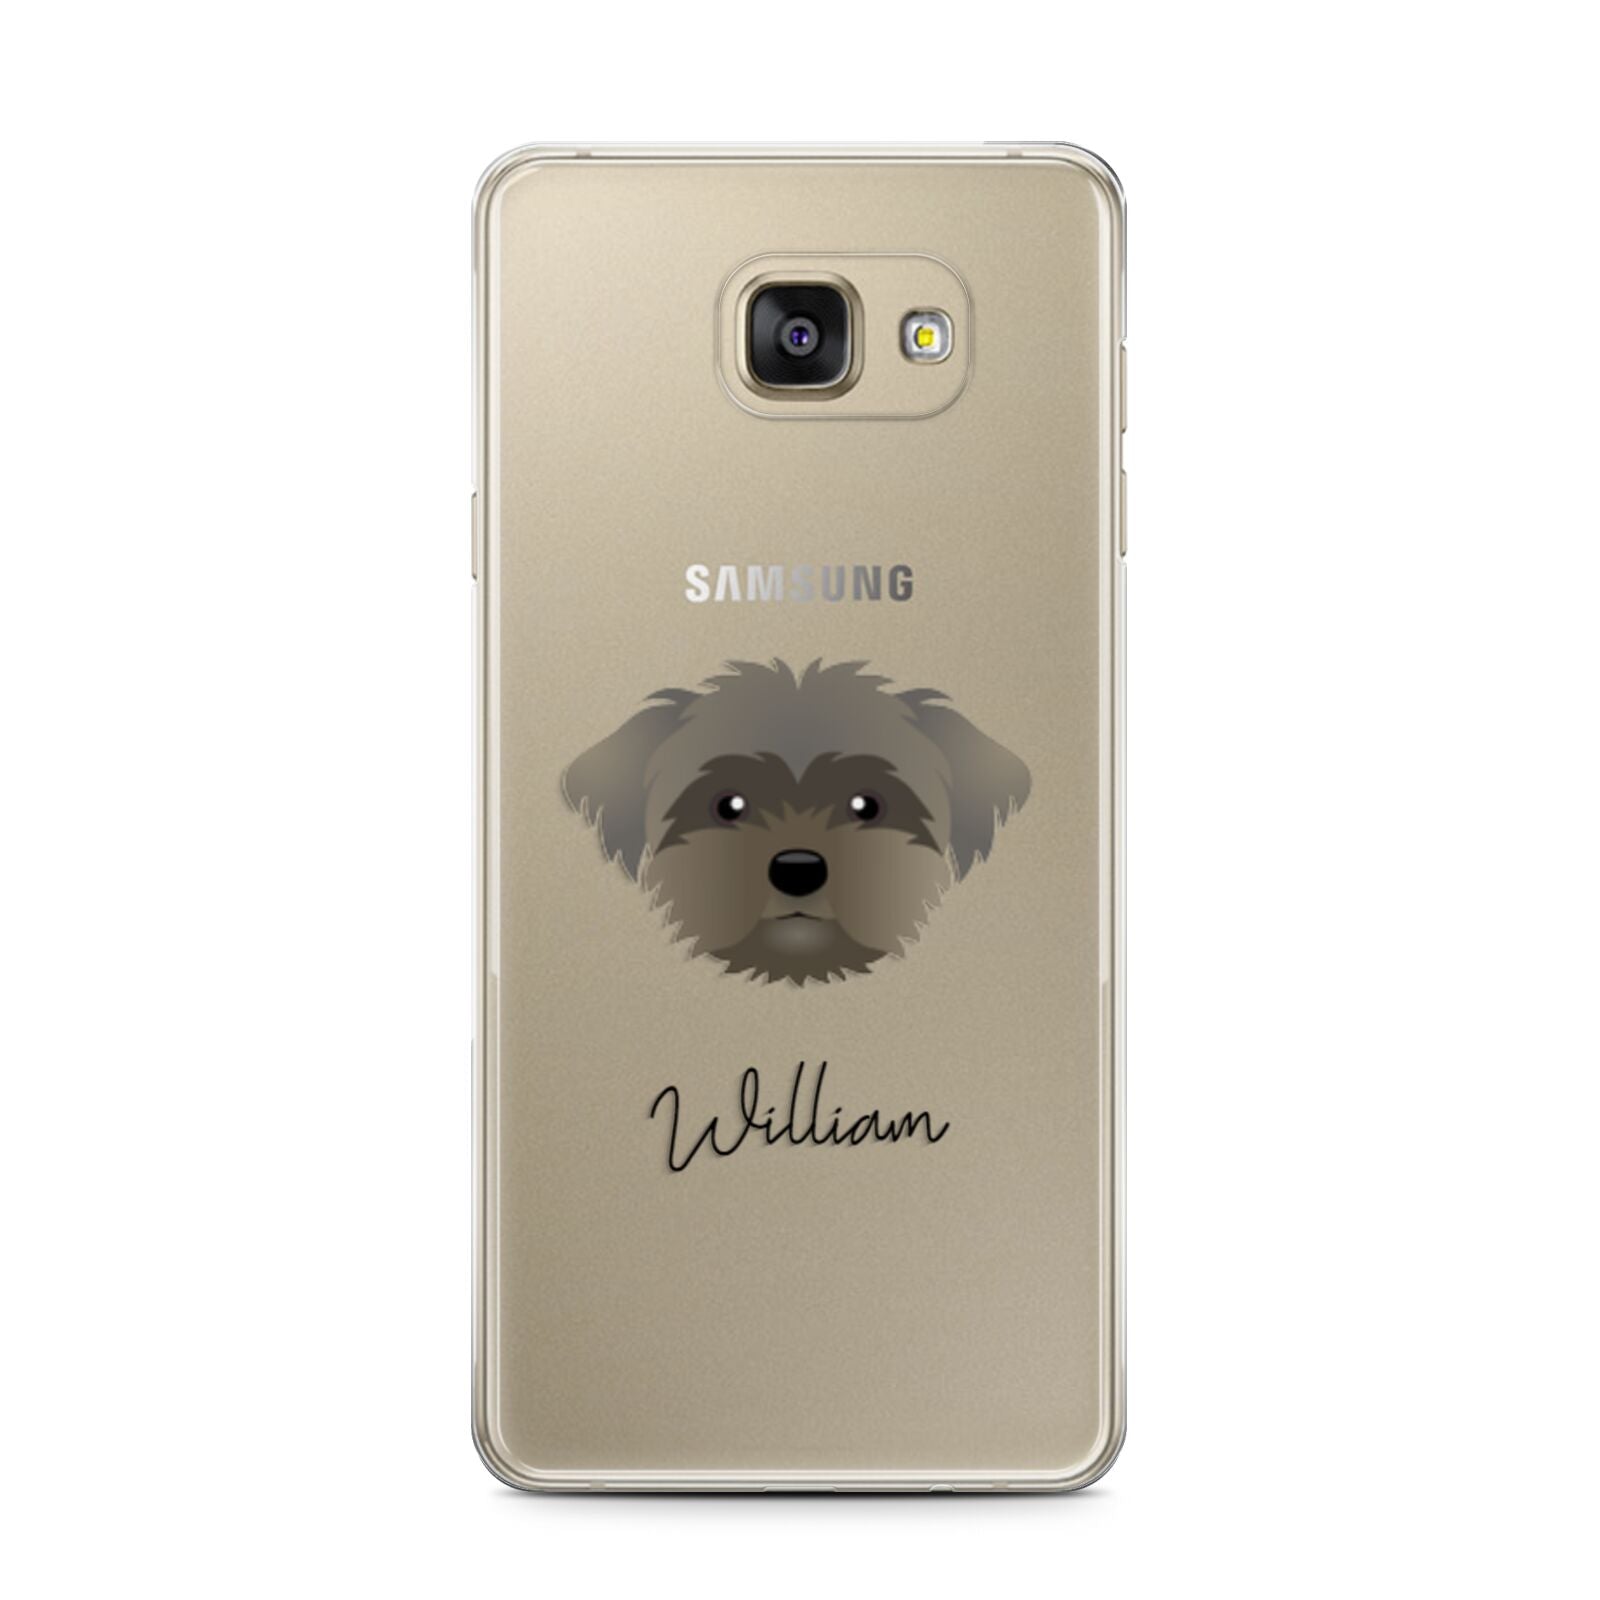 Peek a poo Personalised Samsung Galaxy A7 2016 Case on gold phone